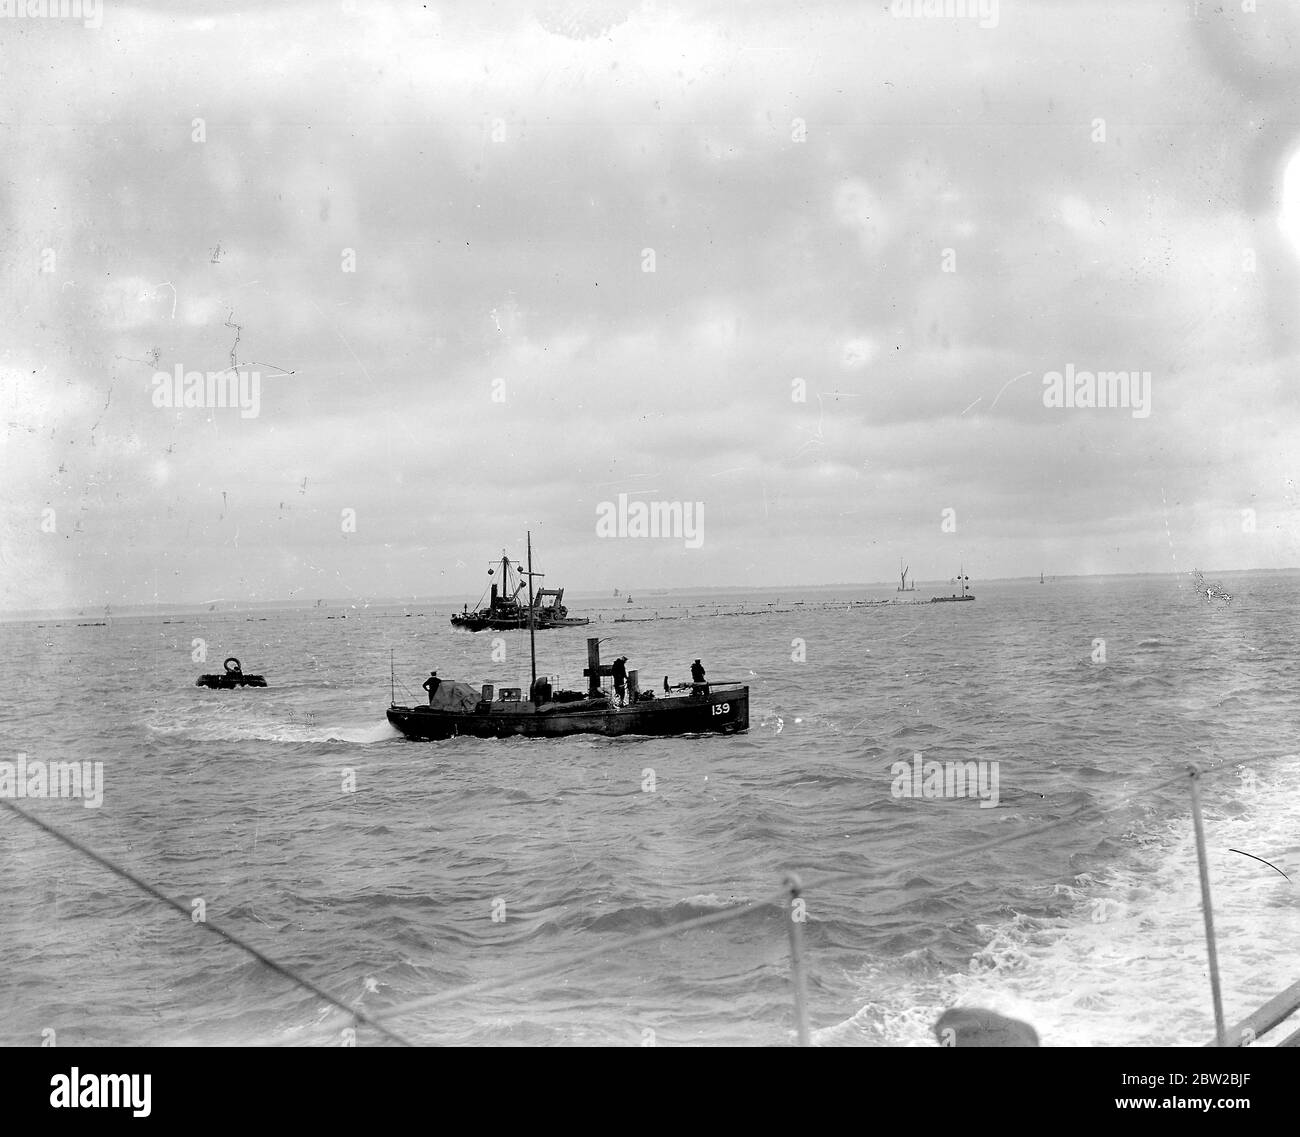 England's Mobilisation. Armed despatch Boat (139) at Sheerness in front of a boom defence boat. 1914 Stock Photo